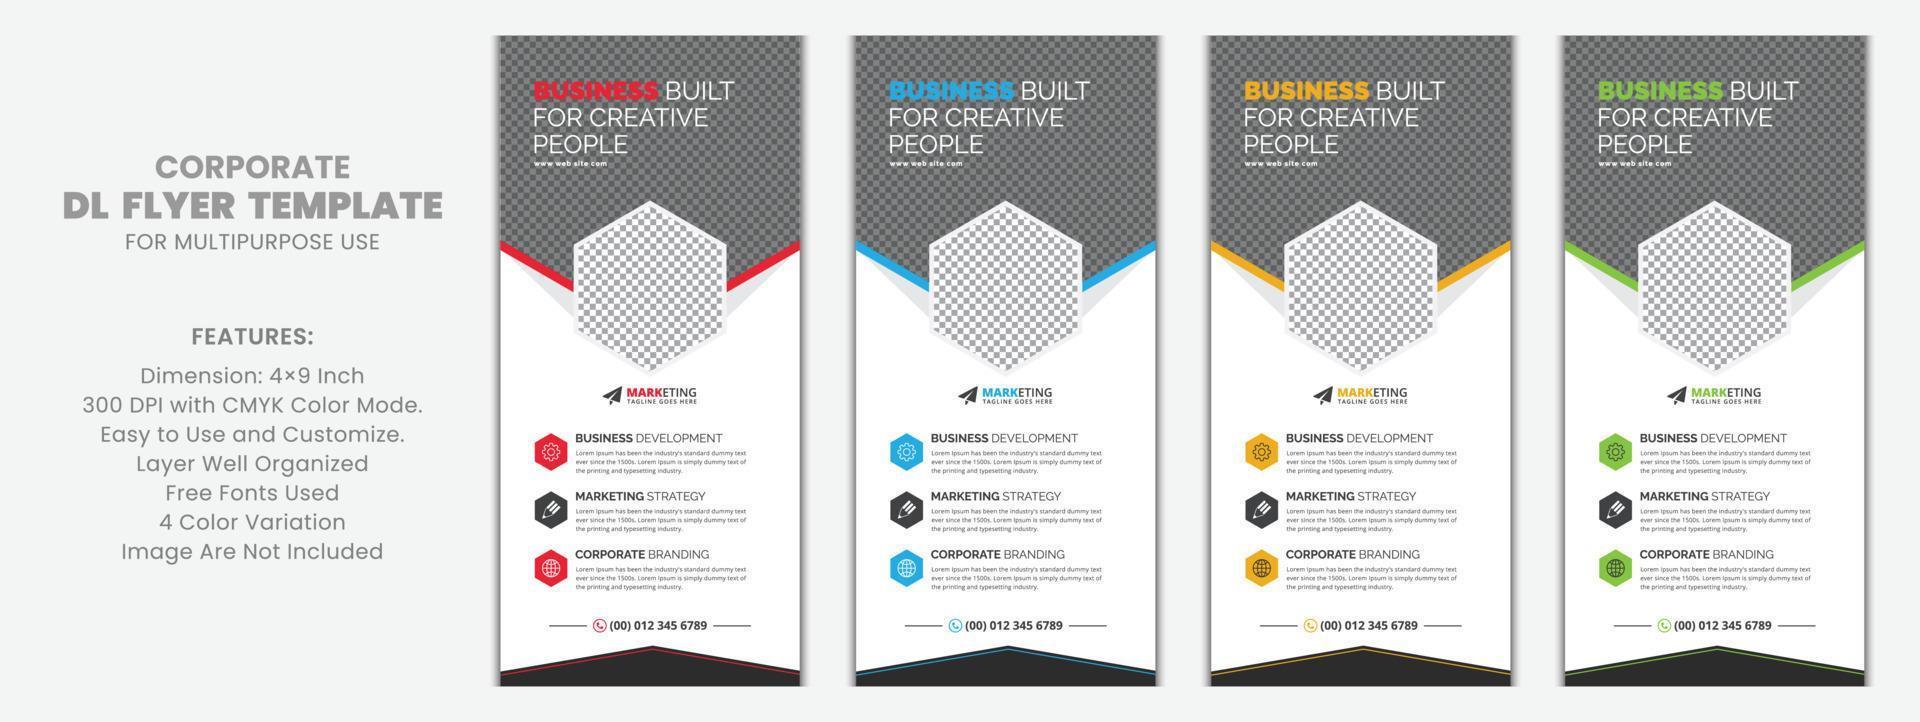 Corporate DL Flyer Rack Card Template Vector Design for Business, Marketing, Advertisement, Multipurpose Use with Red, Blue, Yellow and Green Color Variations